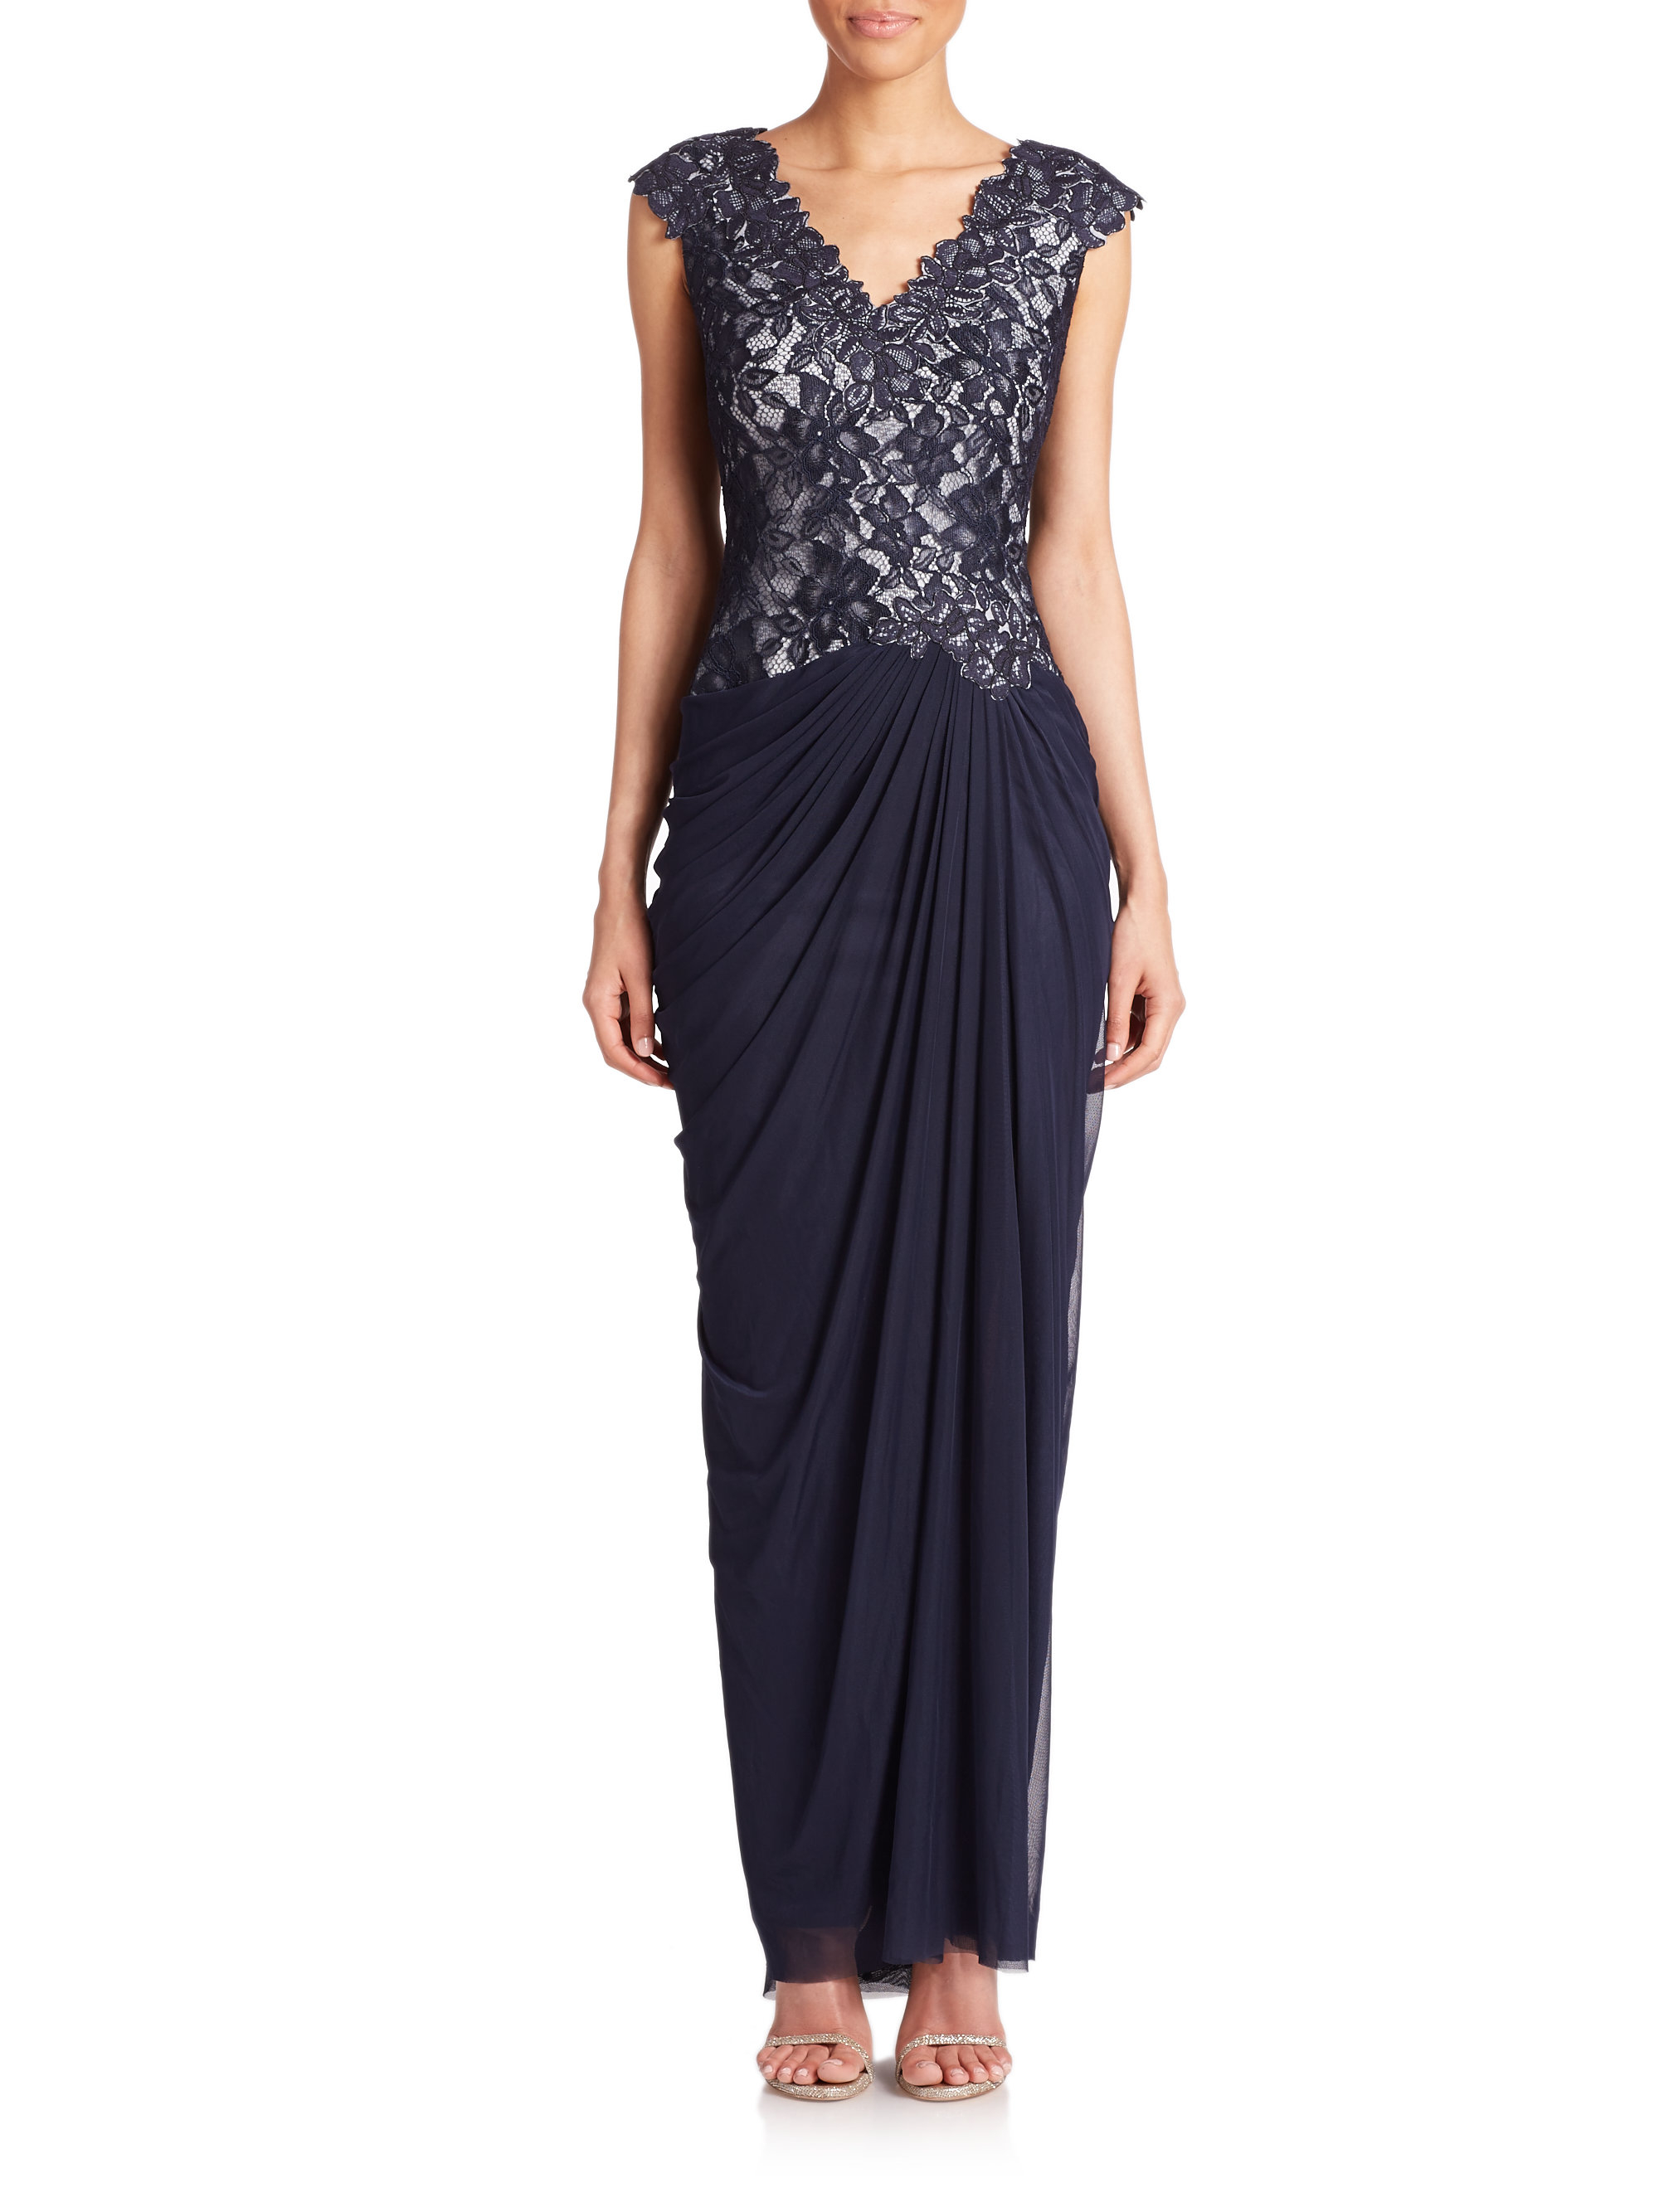 Lyst - Tadashi Shoji Lace & Tulle Draped Combo Gown in Blue